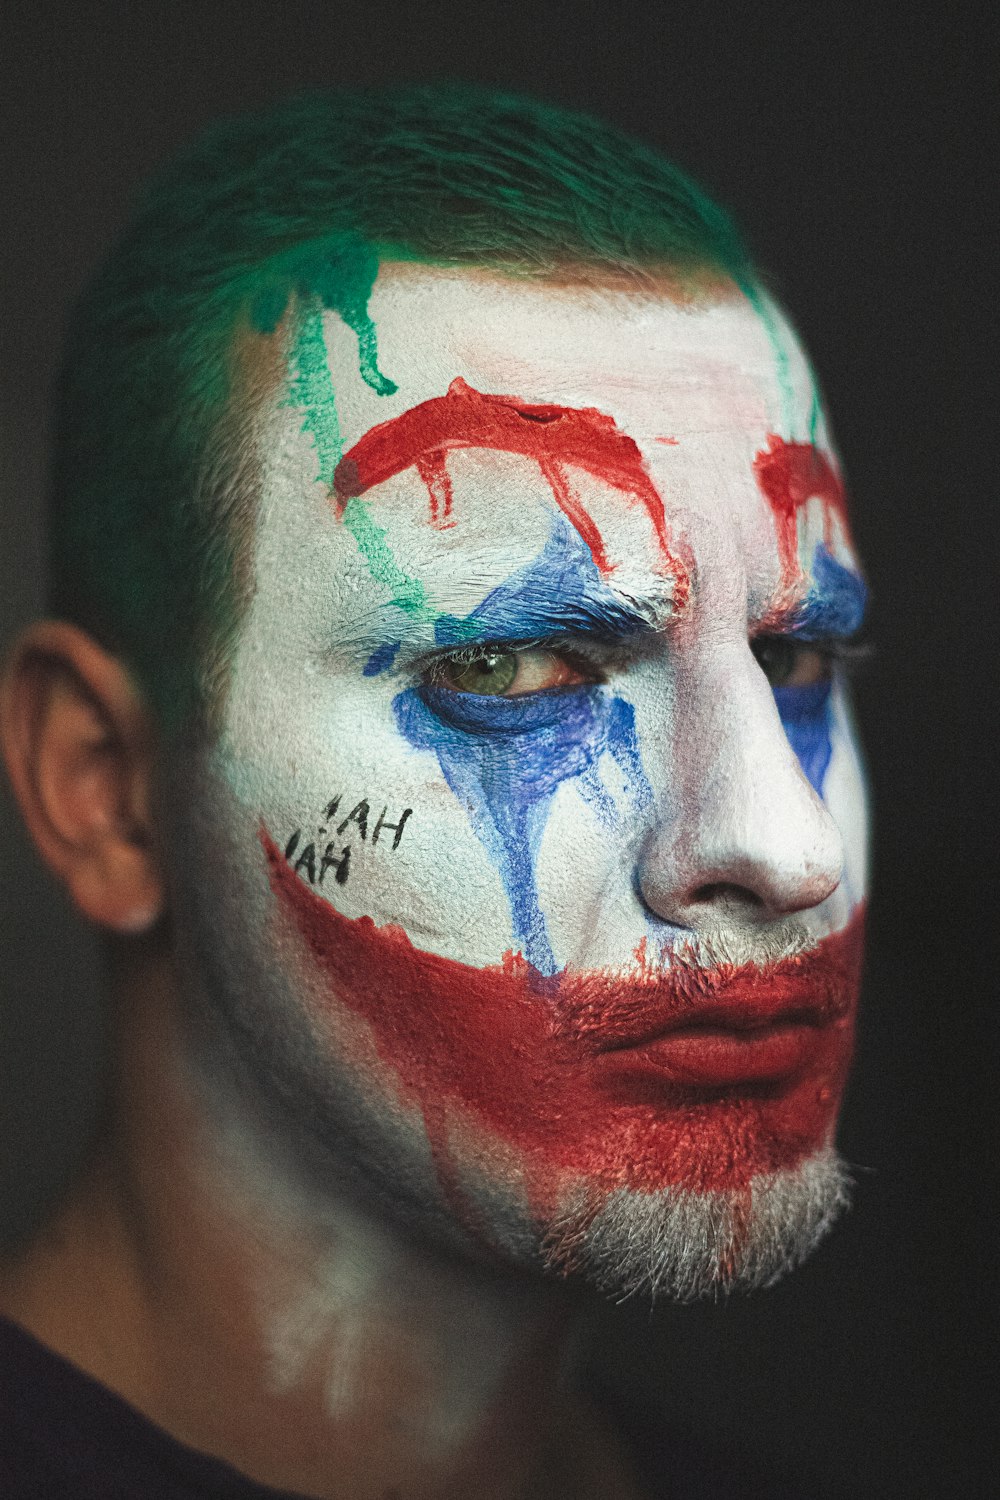 man with blue and red face paint photo – Free Human Image on Unsplash